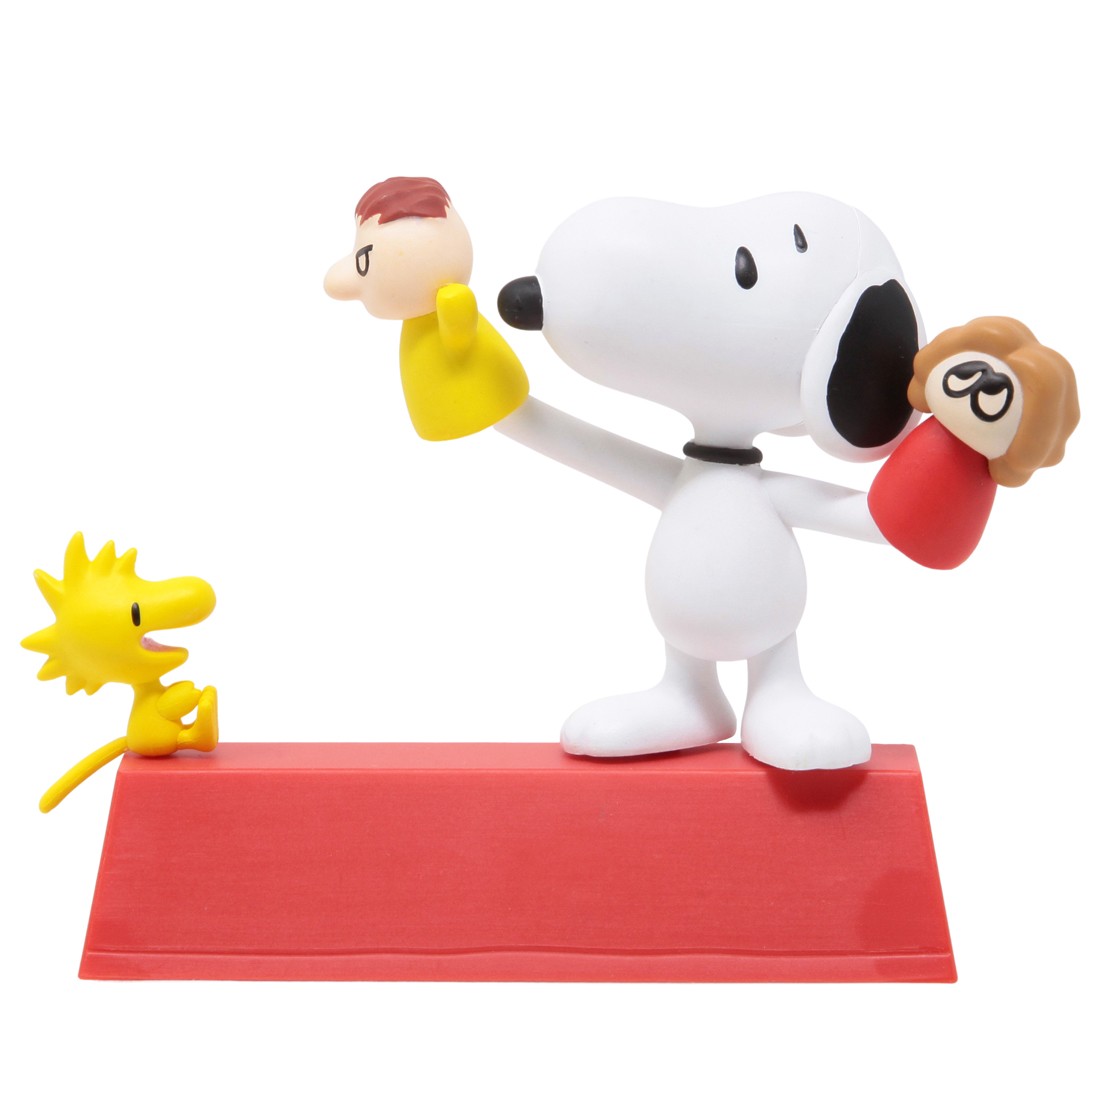 Snoopy and Woodstock Figures - All Star Memory Lane (Red Uniform) - Sn